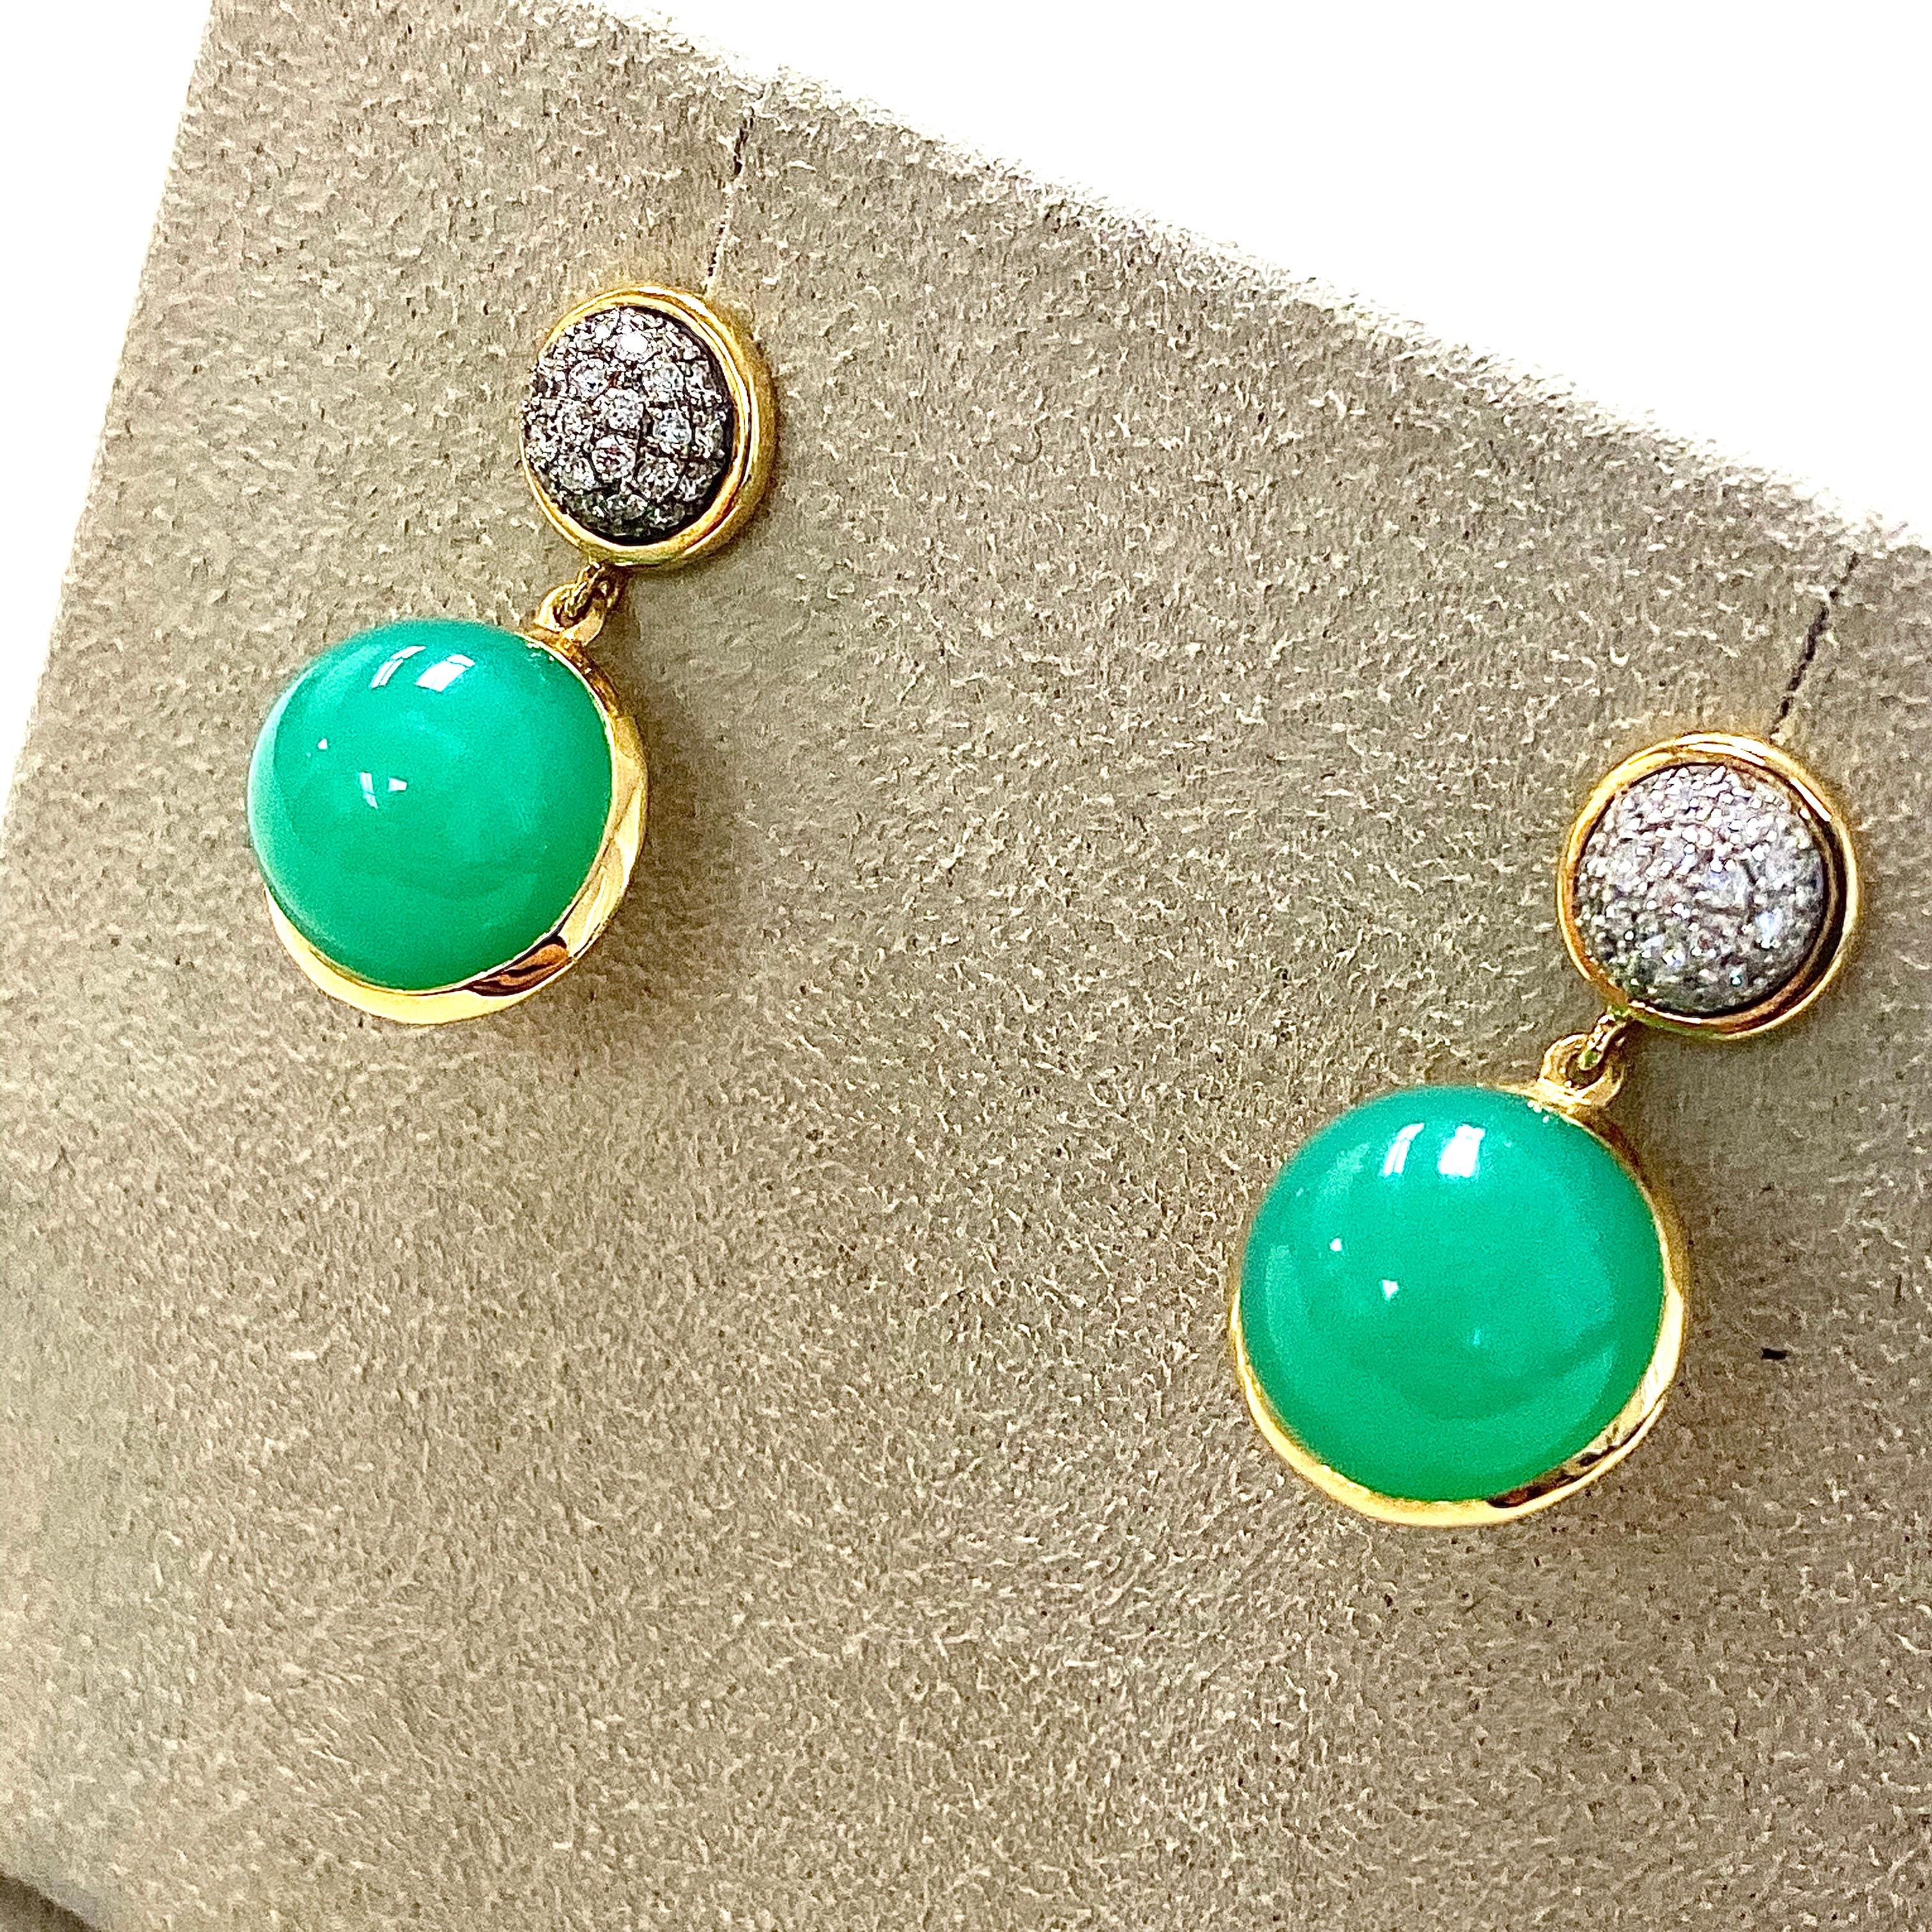 Created in 18 karat yellow gold
Chrysoprase 15 cts approx
Diamonds 0.50 ct approx

Candy Blue Topaz & Diamond Earrings make for a dazzling addition to any jewelry collection. Crafted with 18 karat yellow gold, these earrings are encrusted with